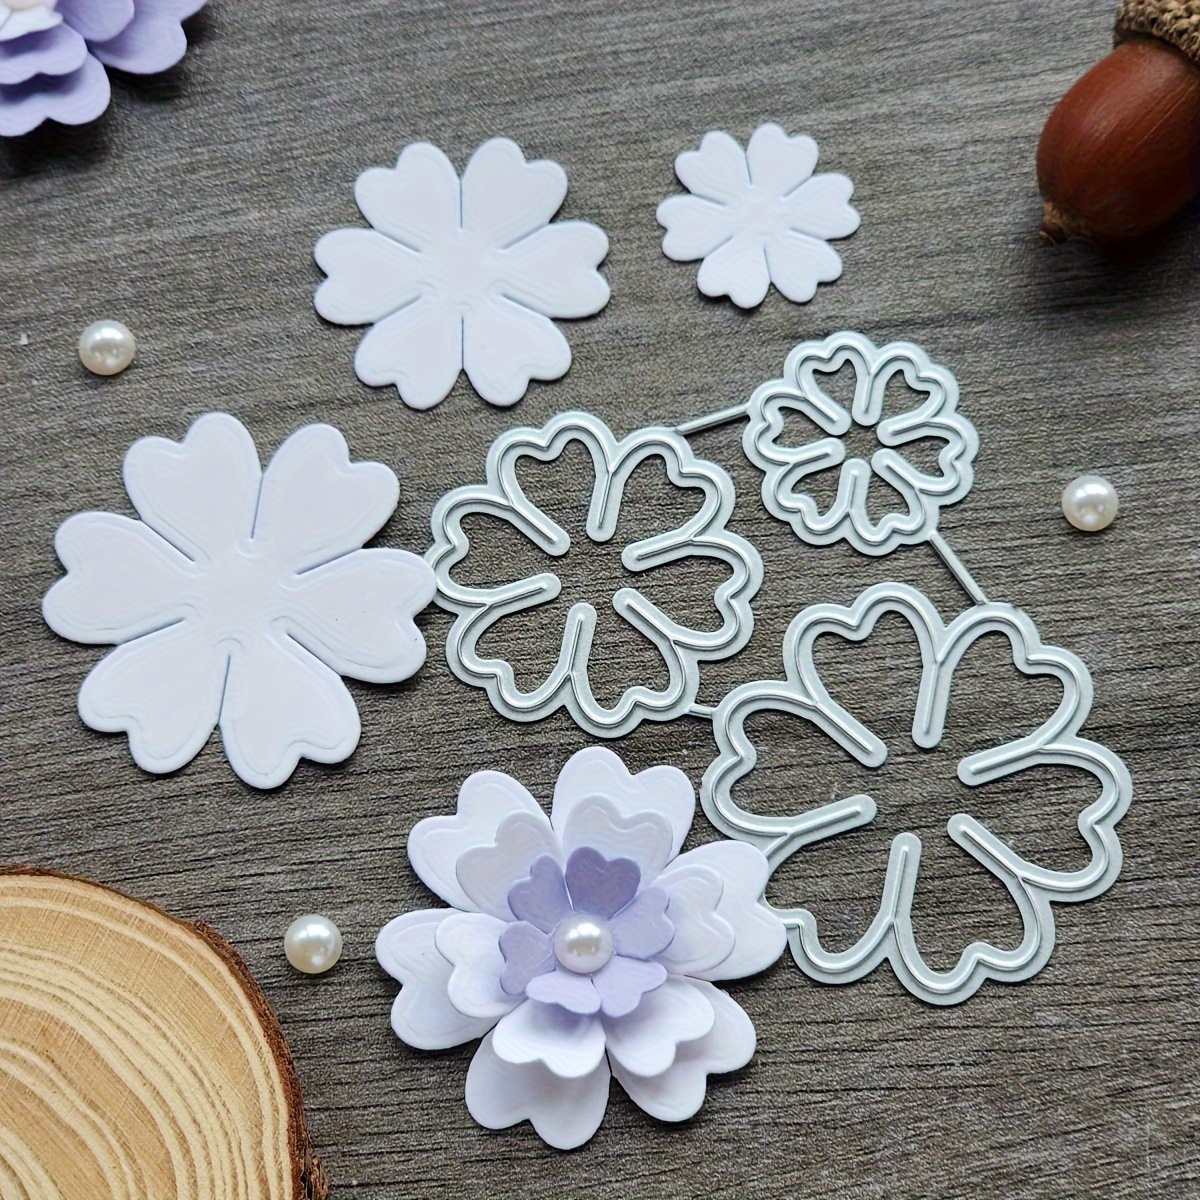 

2-piece Set Floral Cutting Dies For Scrapbooking, Durable Carbon Steel Embossing Templates For Paper Crafts & Decorative Handmade Projects